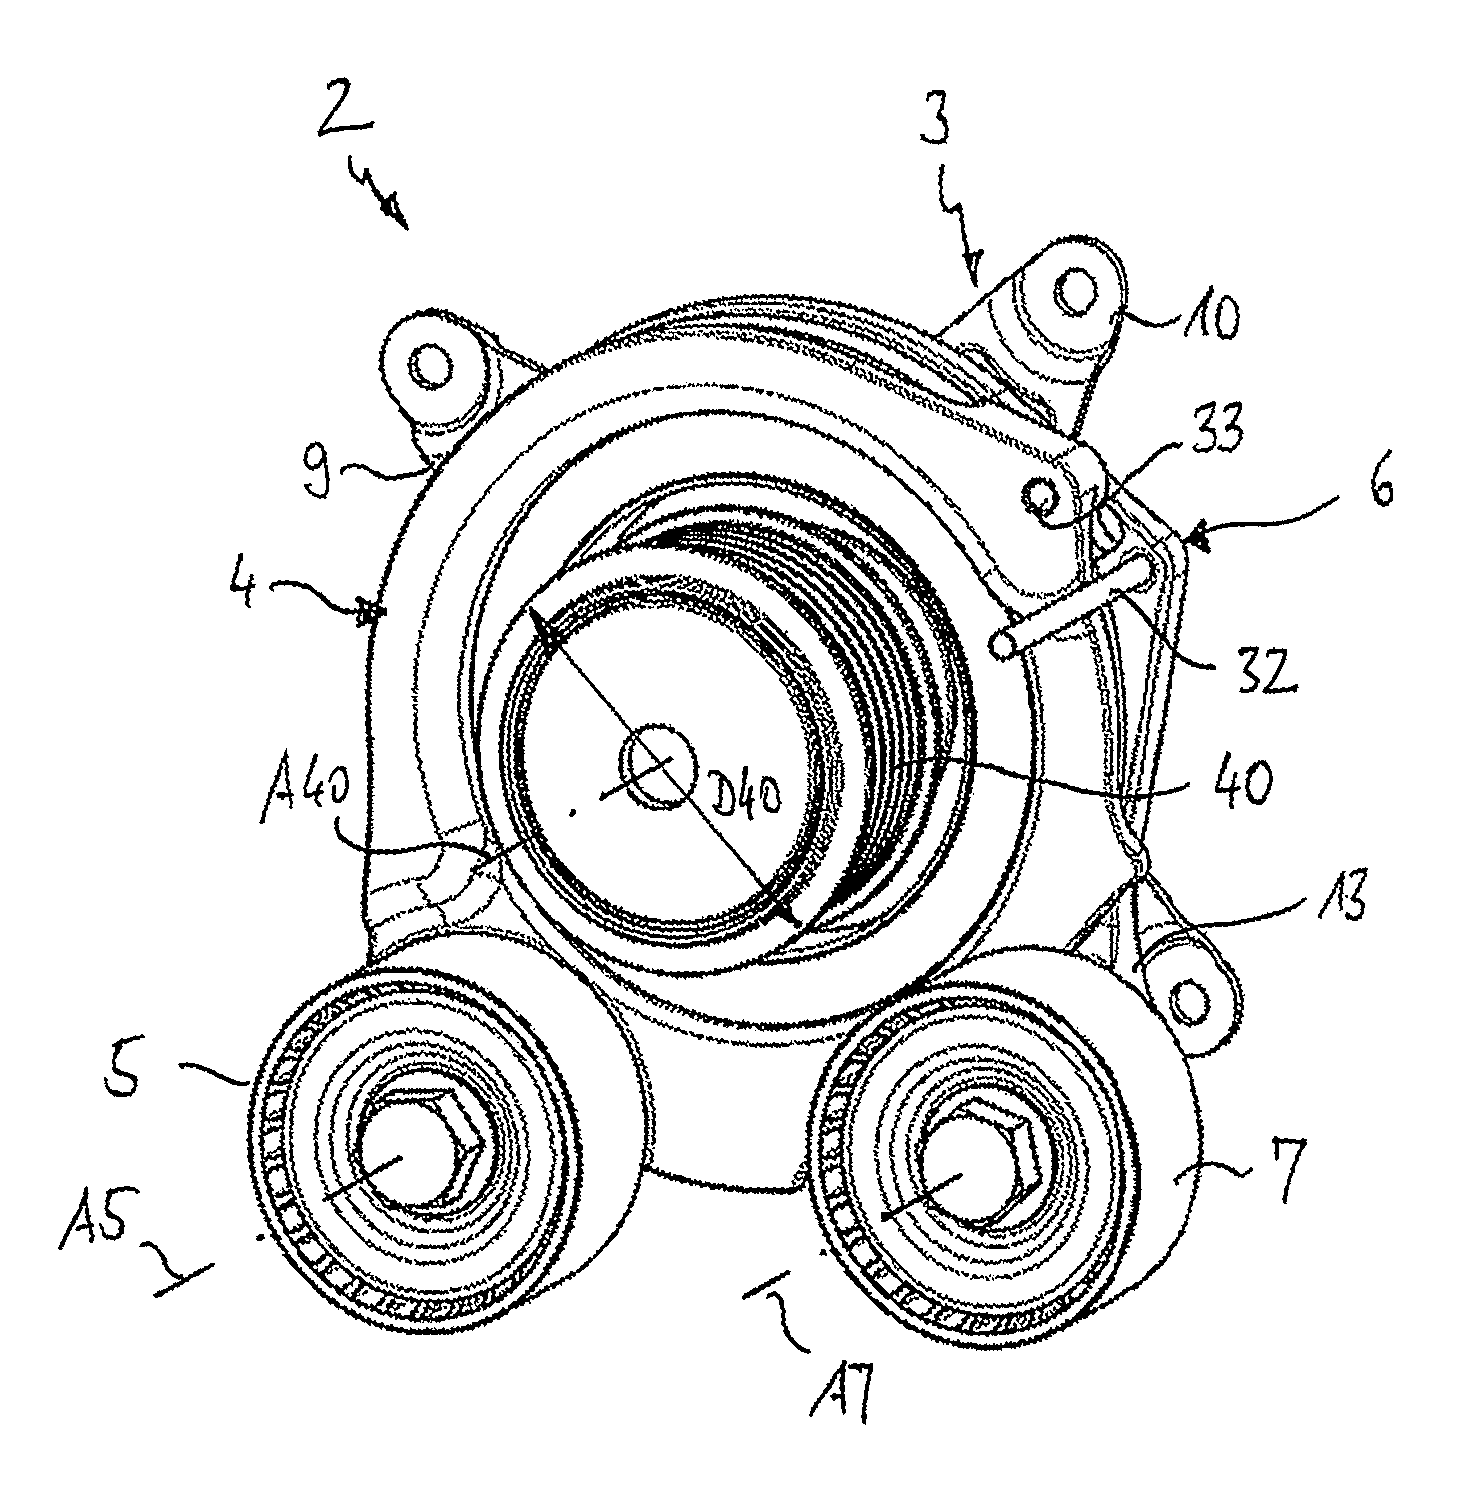 Spring, Belt Tensioning Device, and Assembly